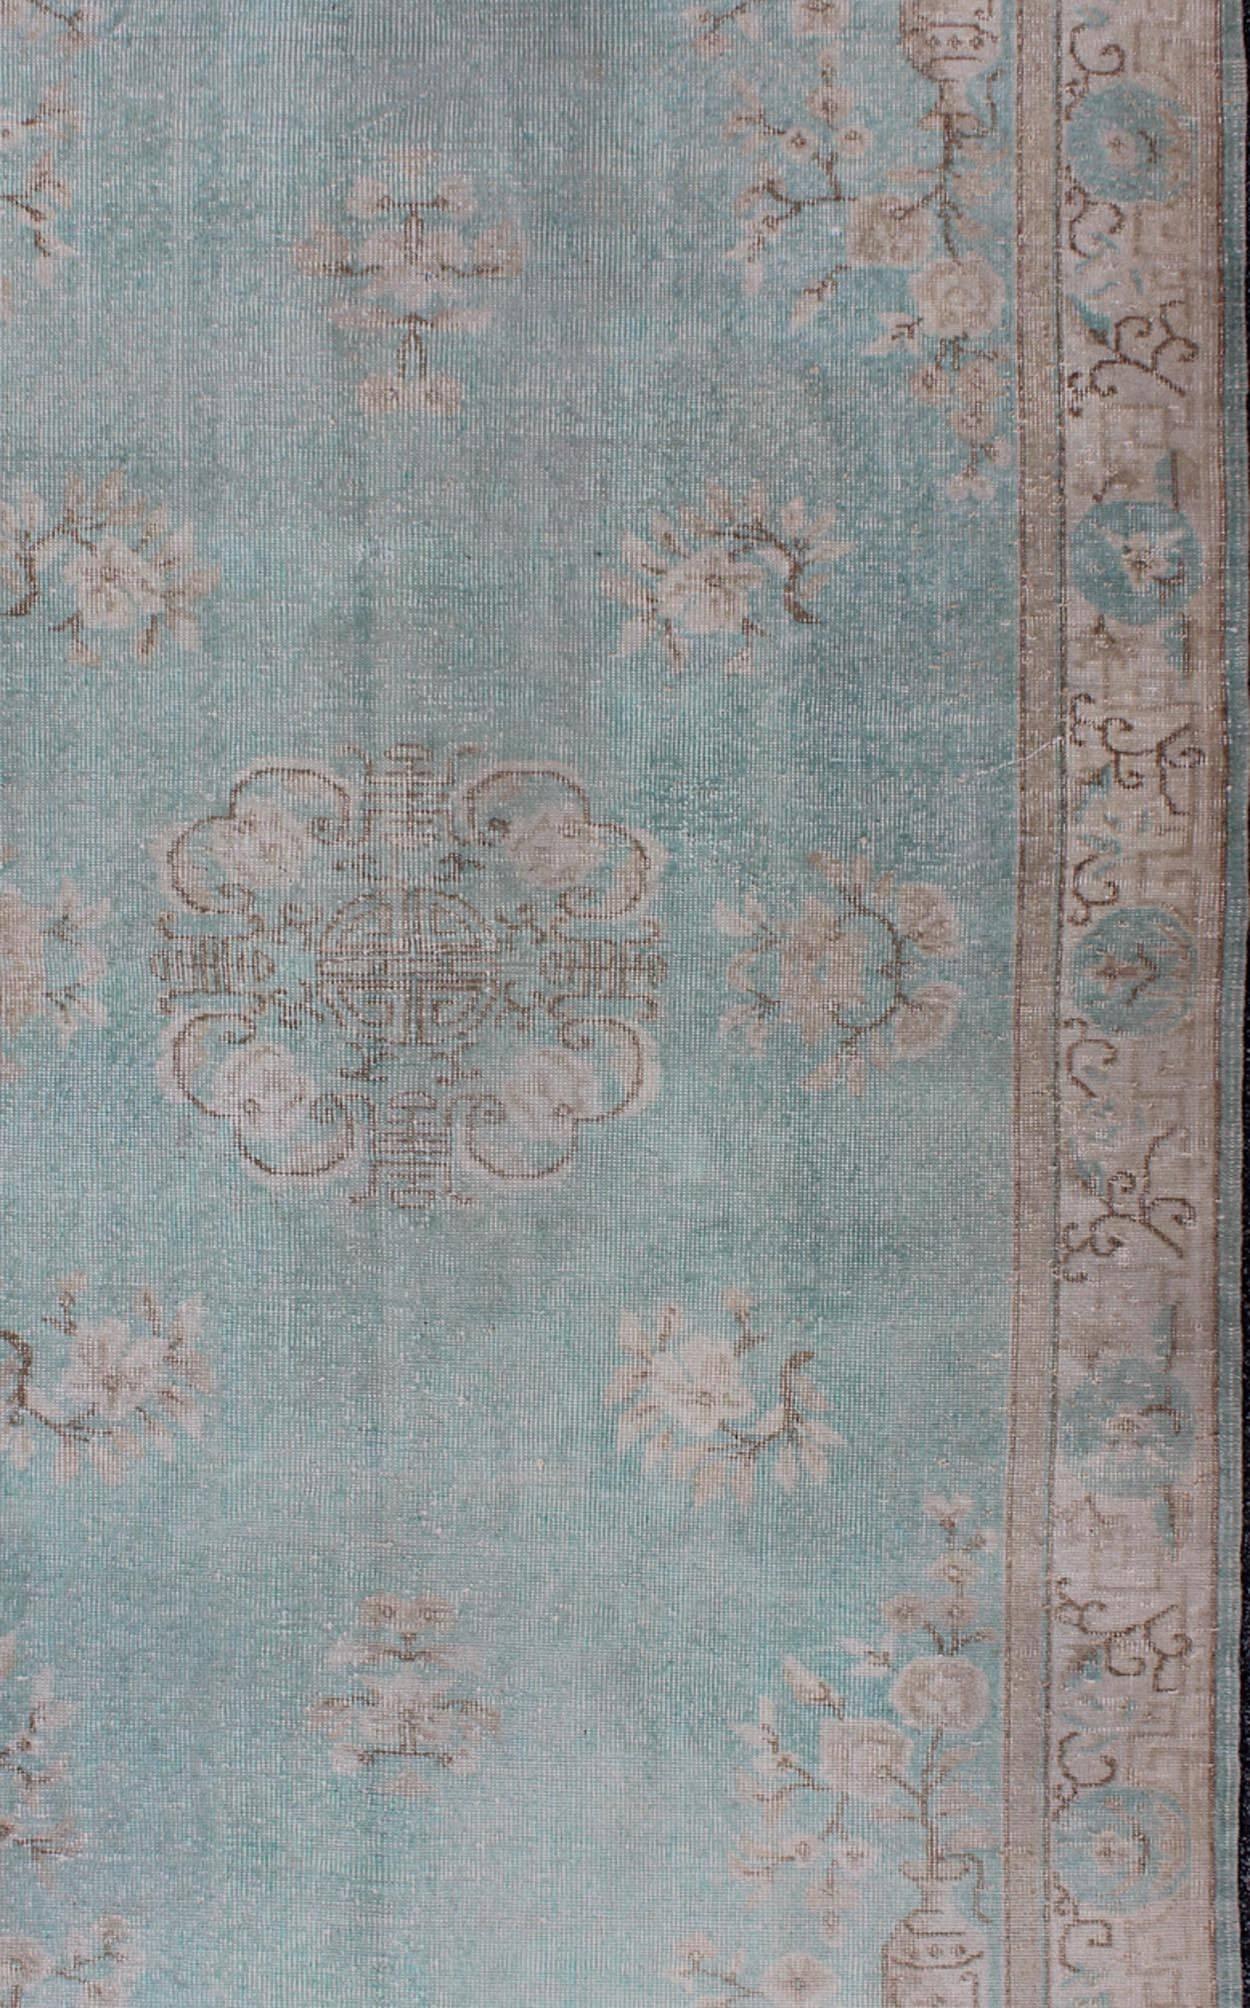 Vintage Turkish Rug with Khotan Design in Sea Foam Blue, Taupe and Light Brown In Good Condition For Sale In Atlanta, GA